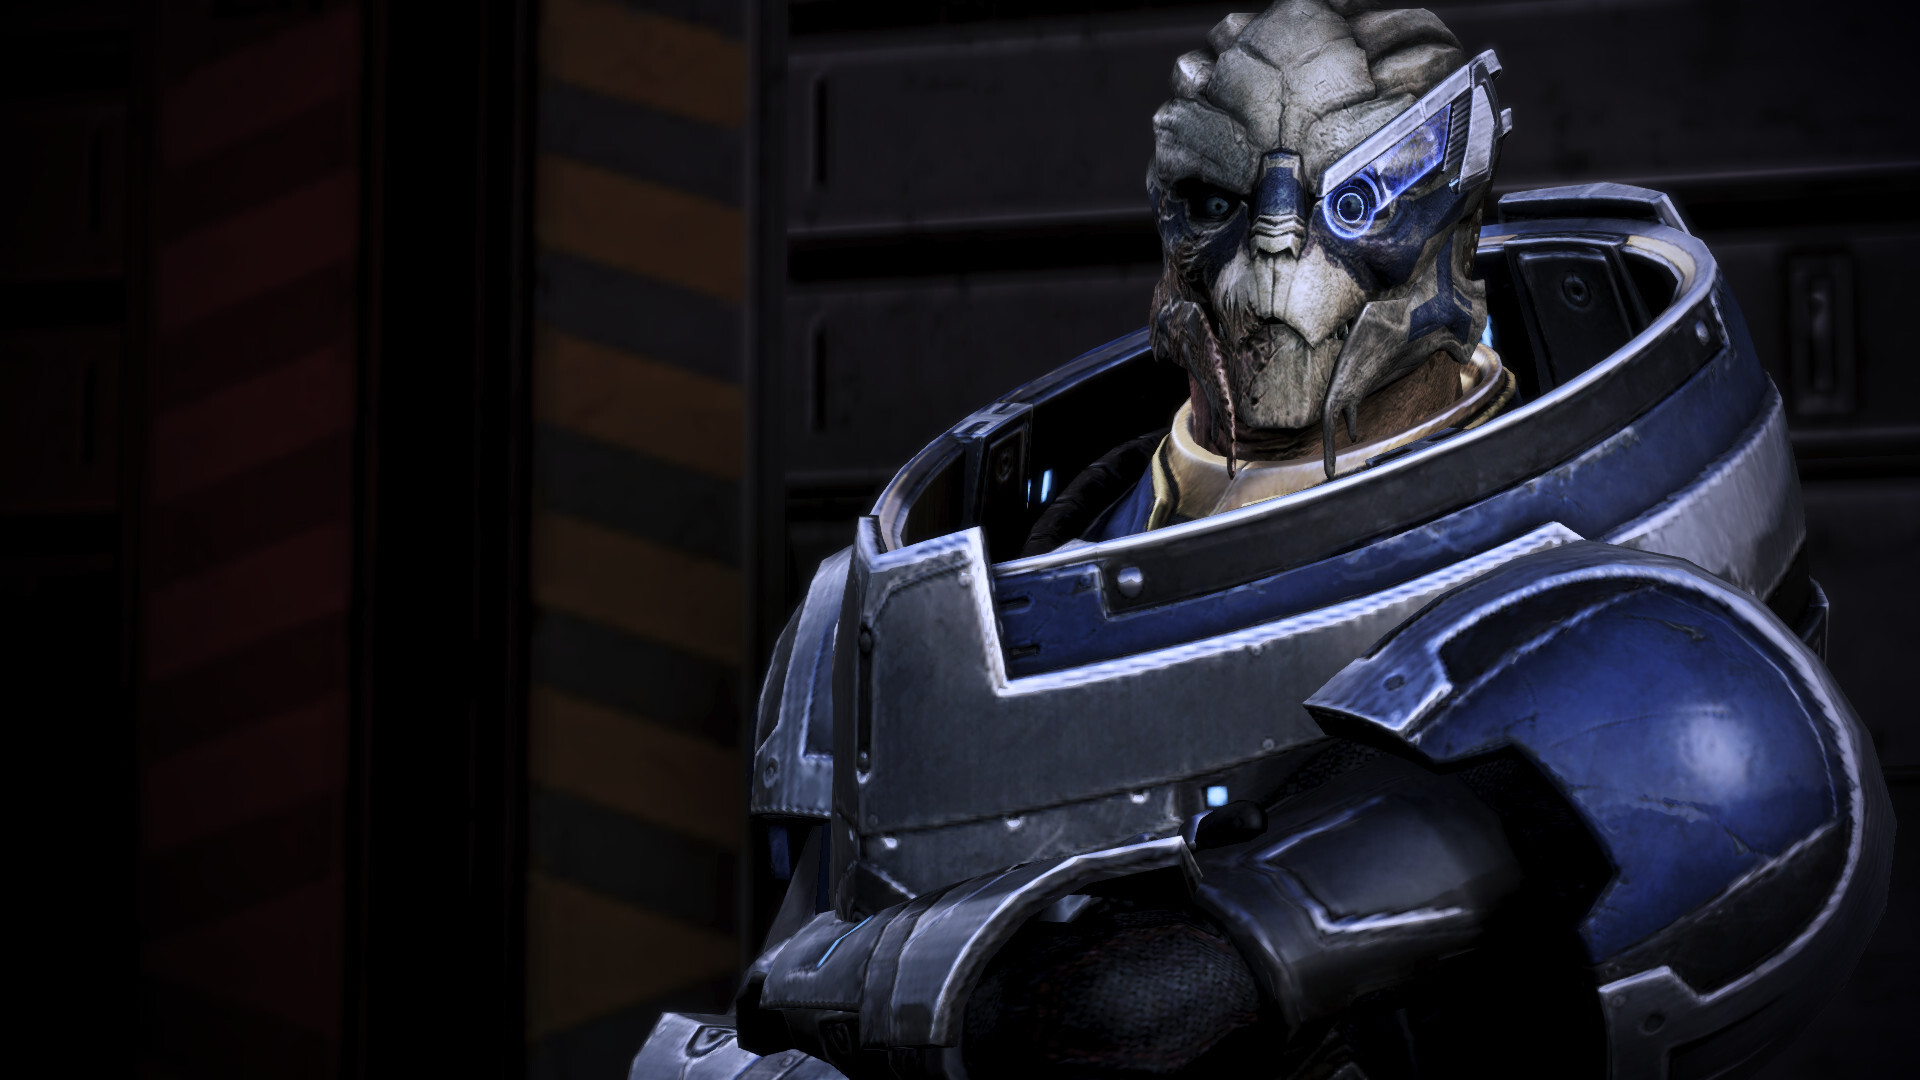 Garrus Vakarian: Turian General and a brave warrior, Expert sniper, Squad leader and a member of Shepard's team. 1920x1080 Full HD Background.